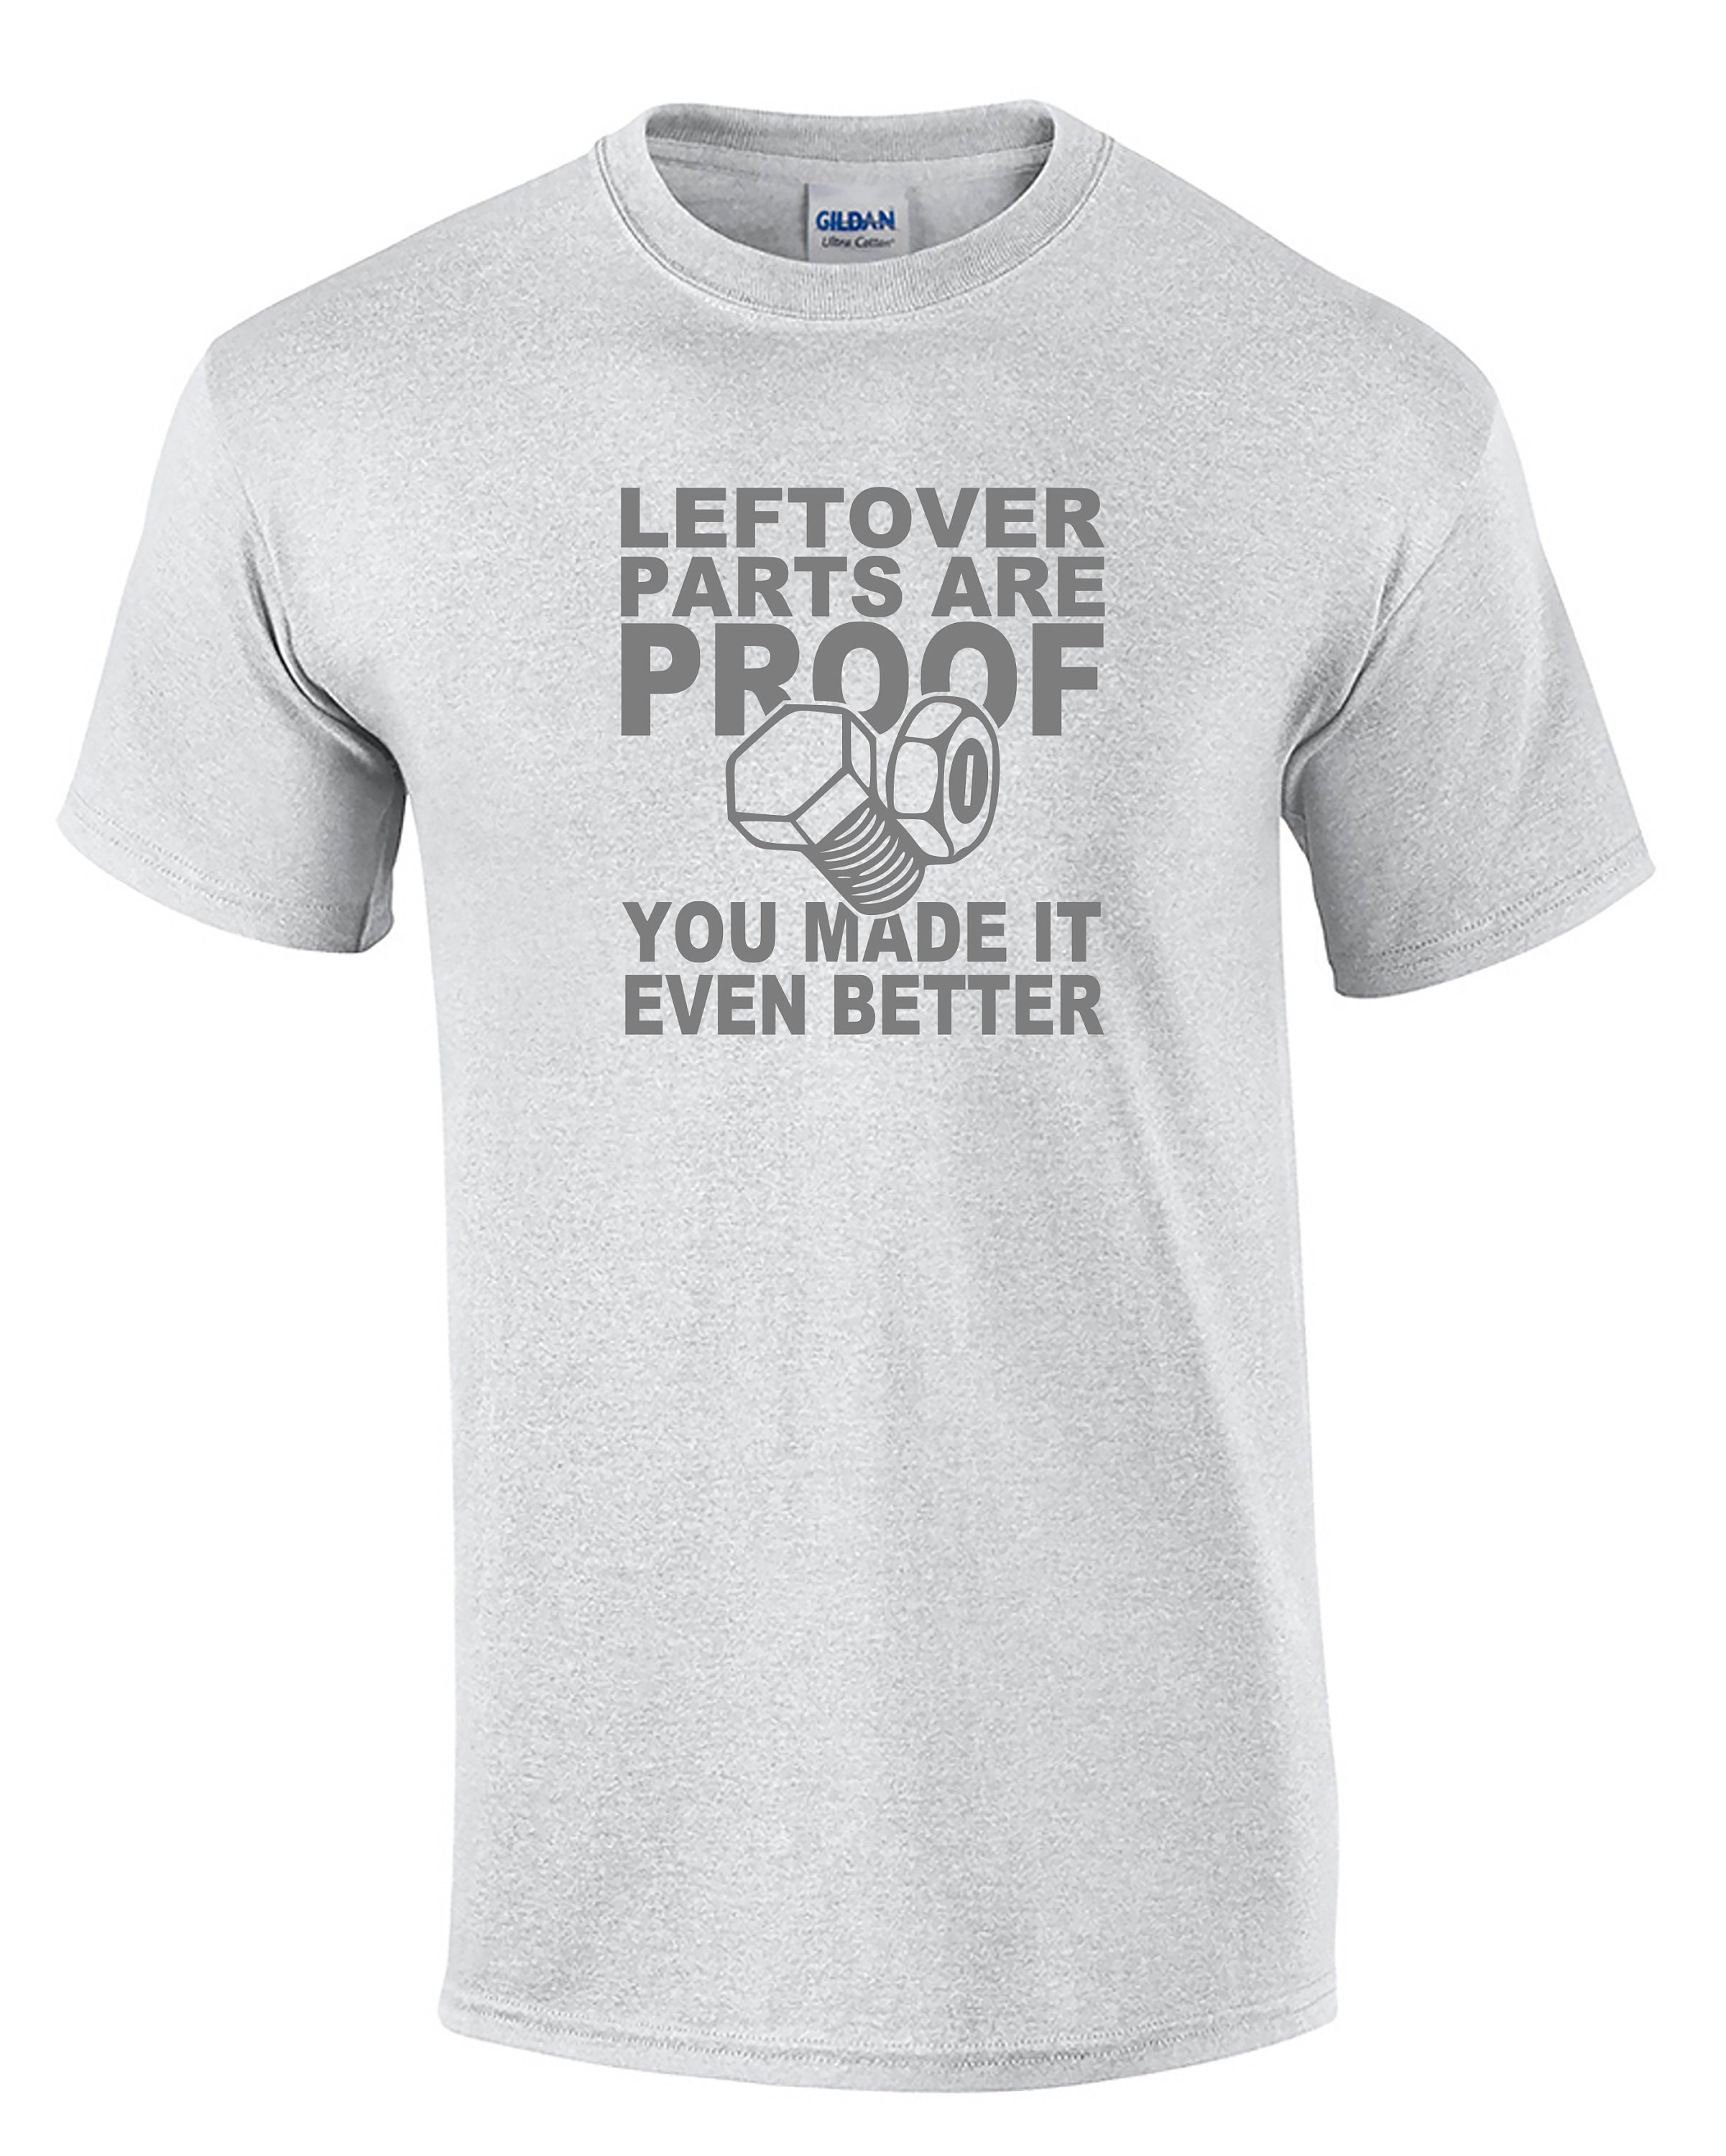 Leftover Parts Are Proof You Made It Even Better mens T-shirt -  Canada